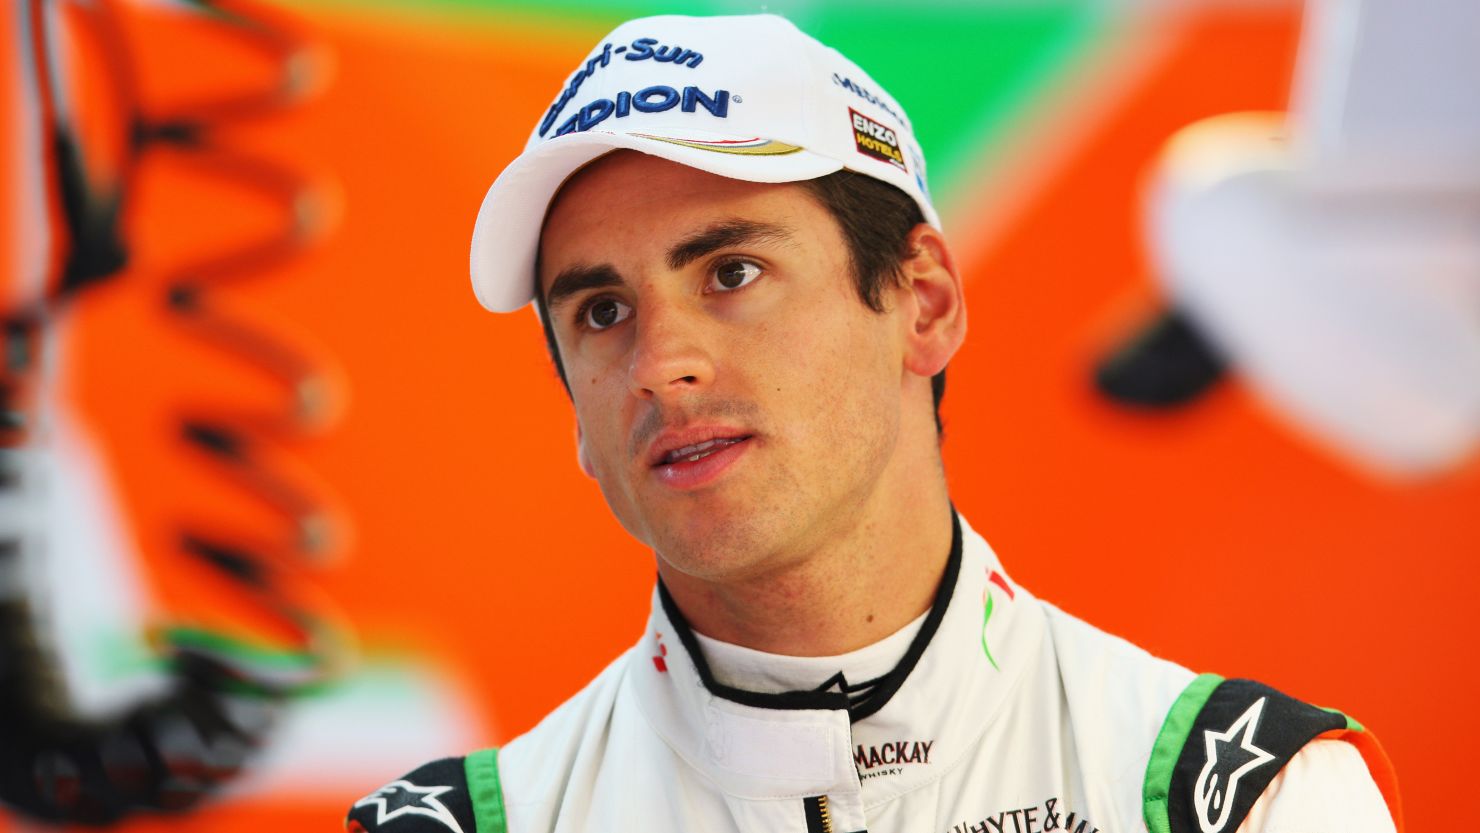 Adrian Sutil has been given a second chance at Force India for the 2013 season.